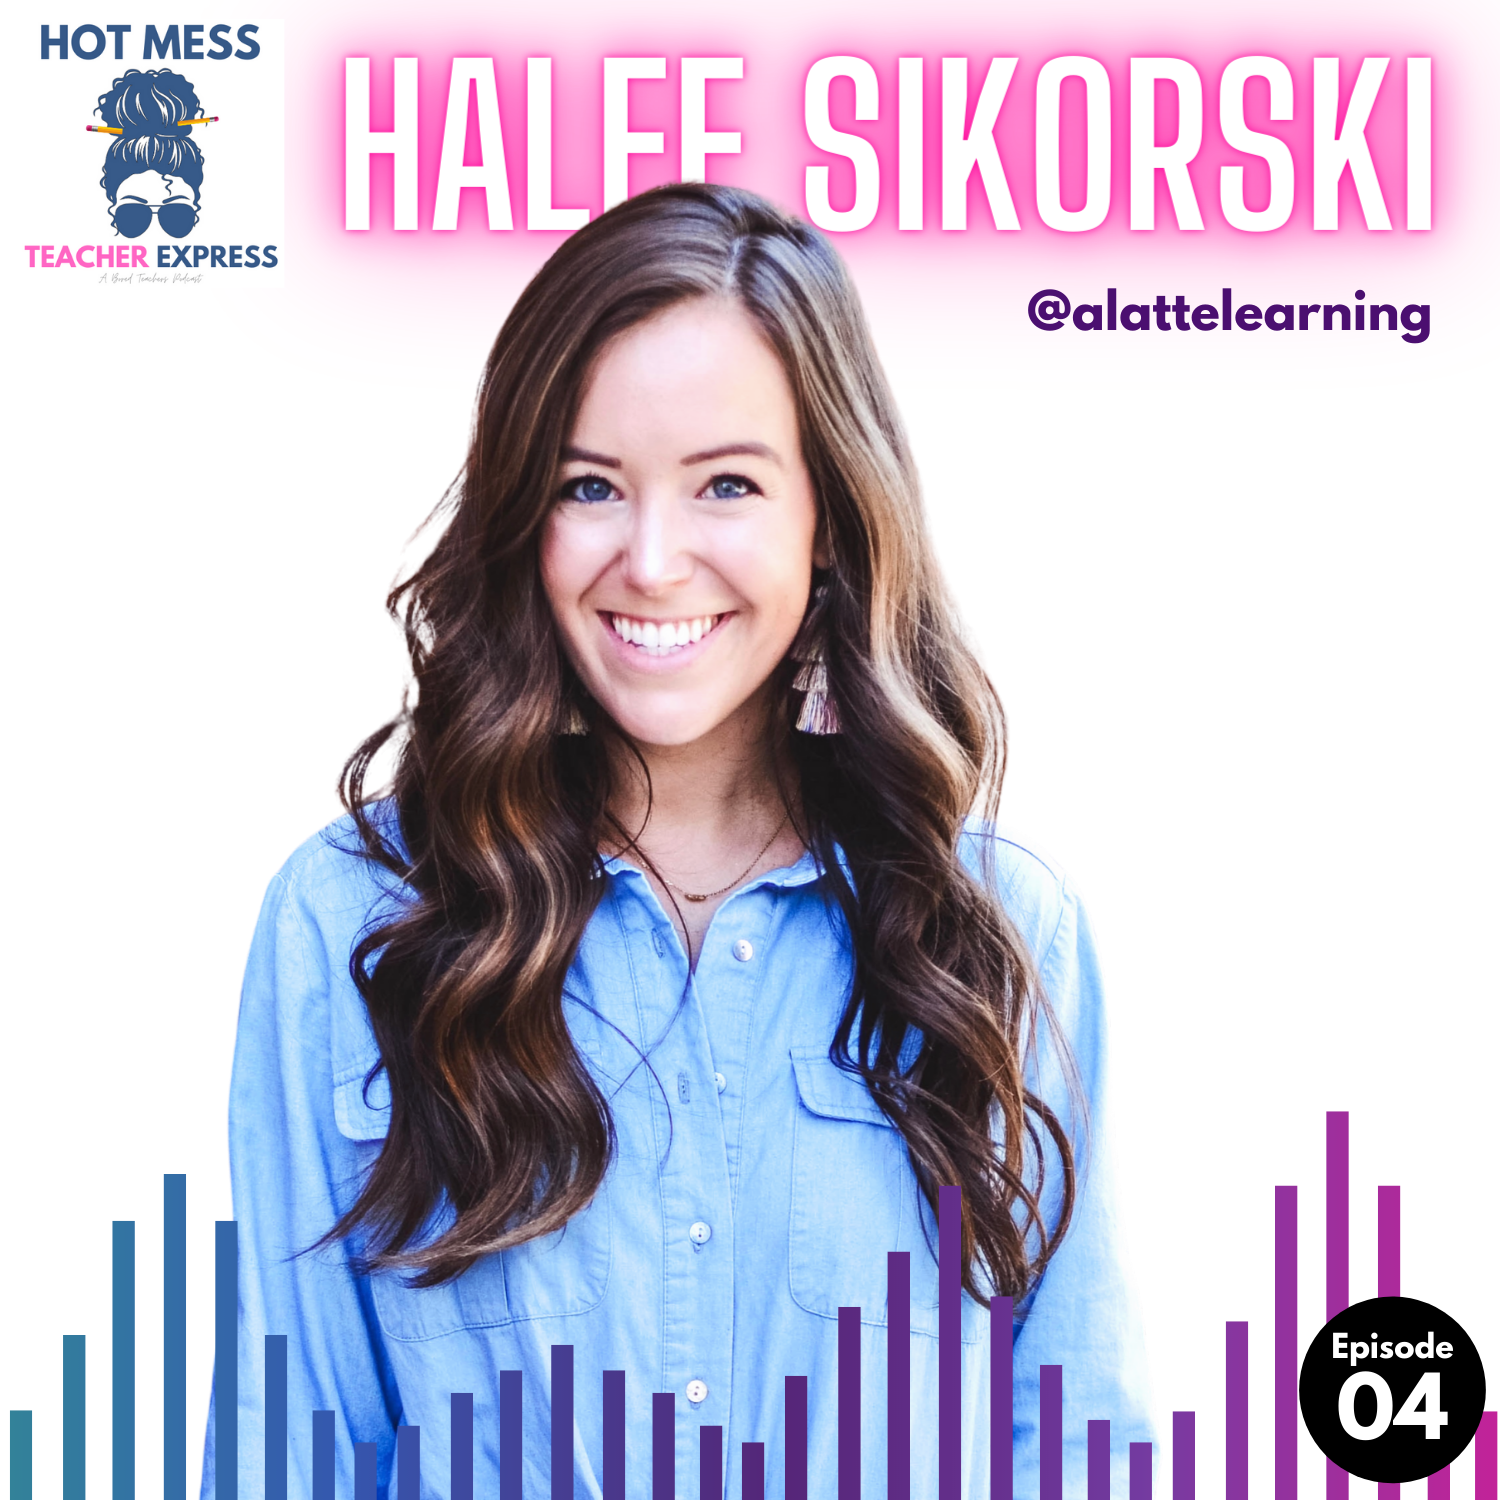 Episode #4 - Toxic Positivity, Boundaries, Self Care & a Healthy Addiction to Target - with Halee Sikorski (@alattelearning)